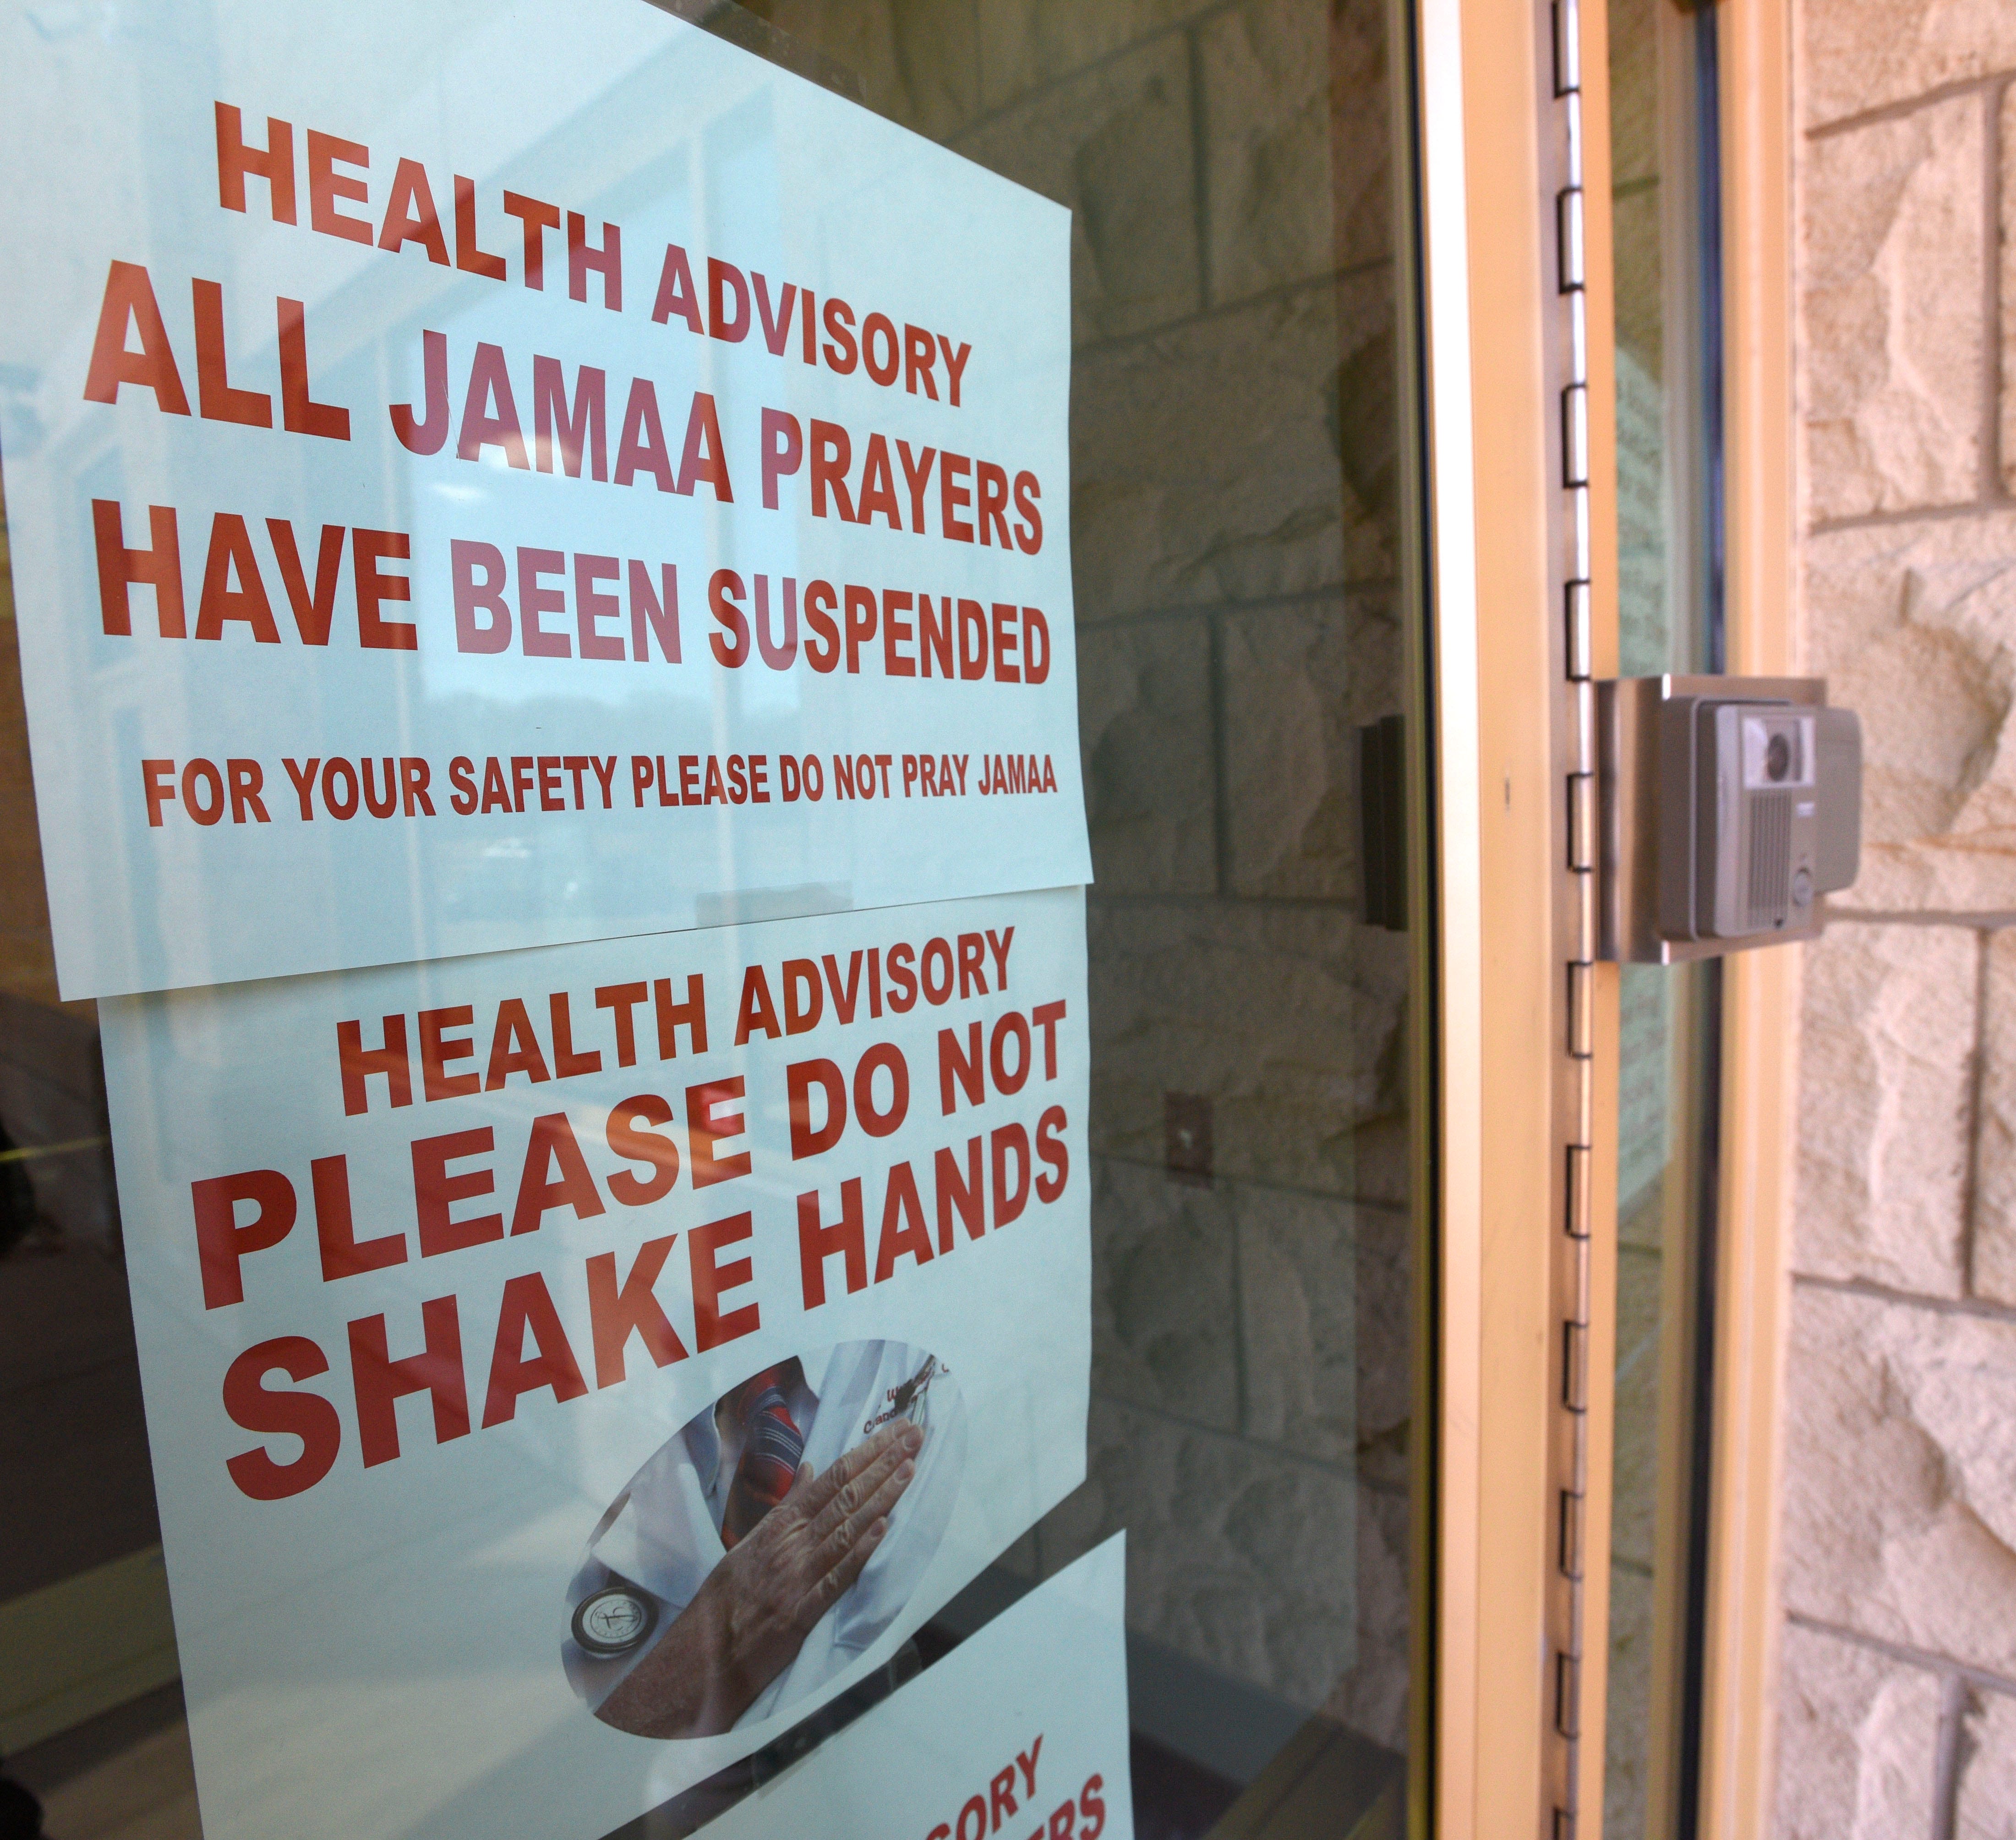 Personal protection instructions are posted on the office doors to the Islamic Center of America.